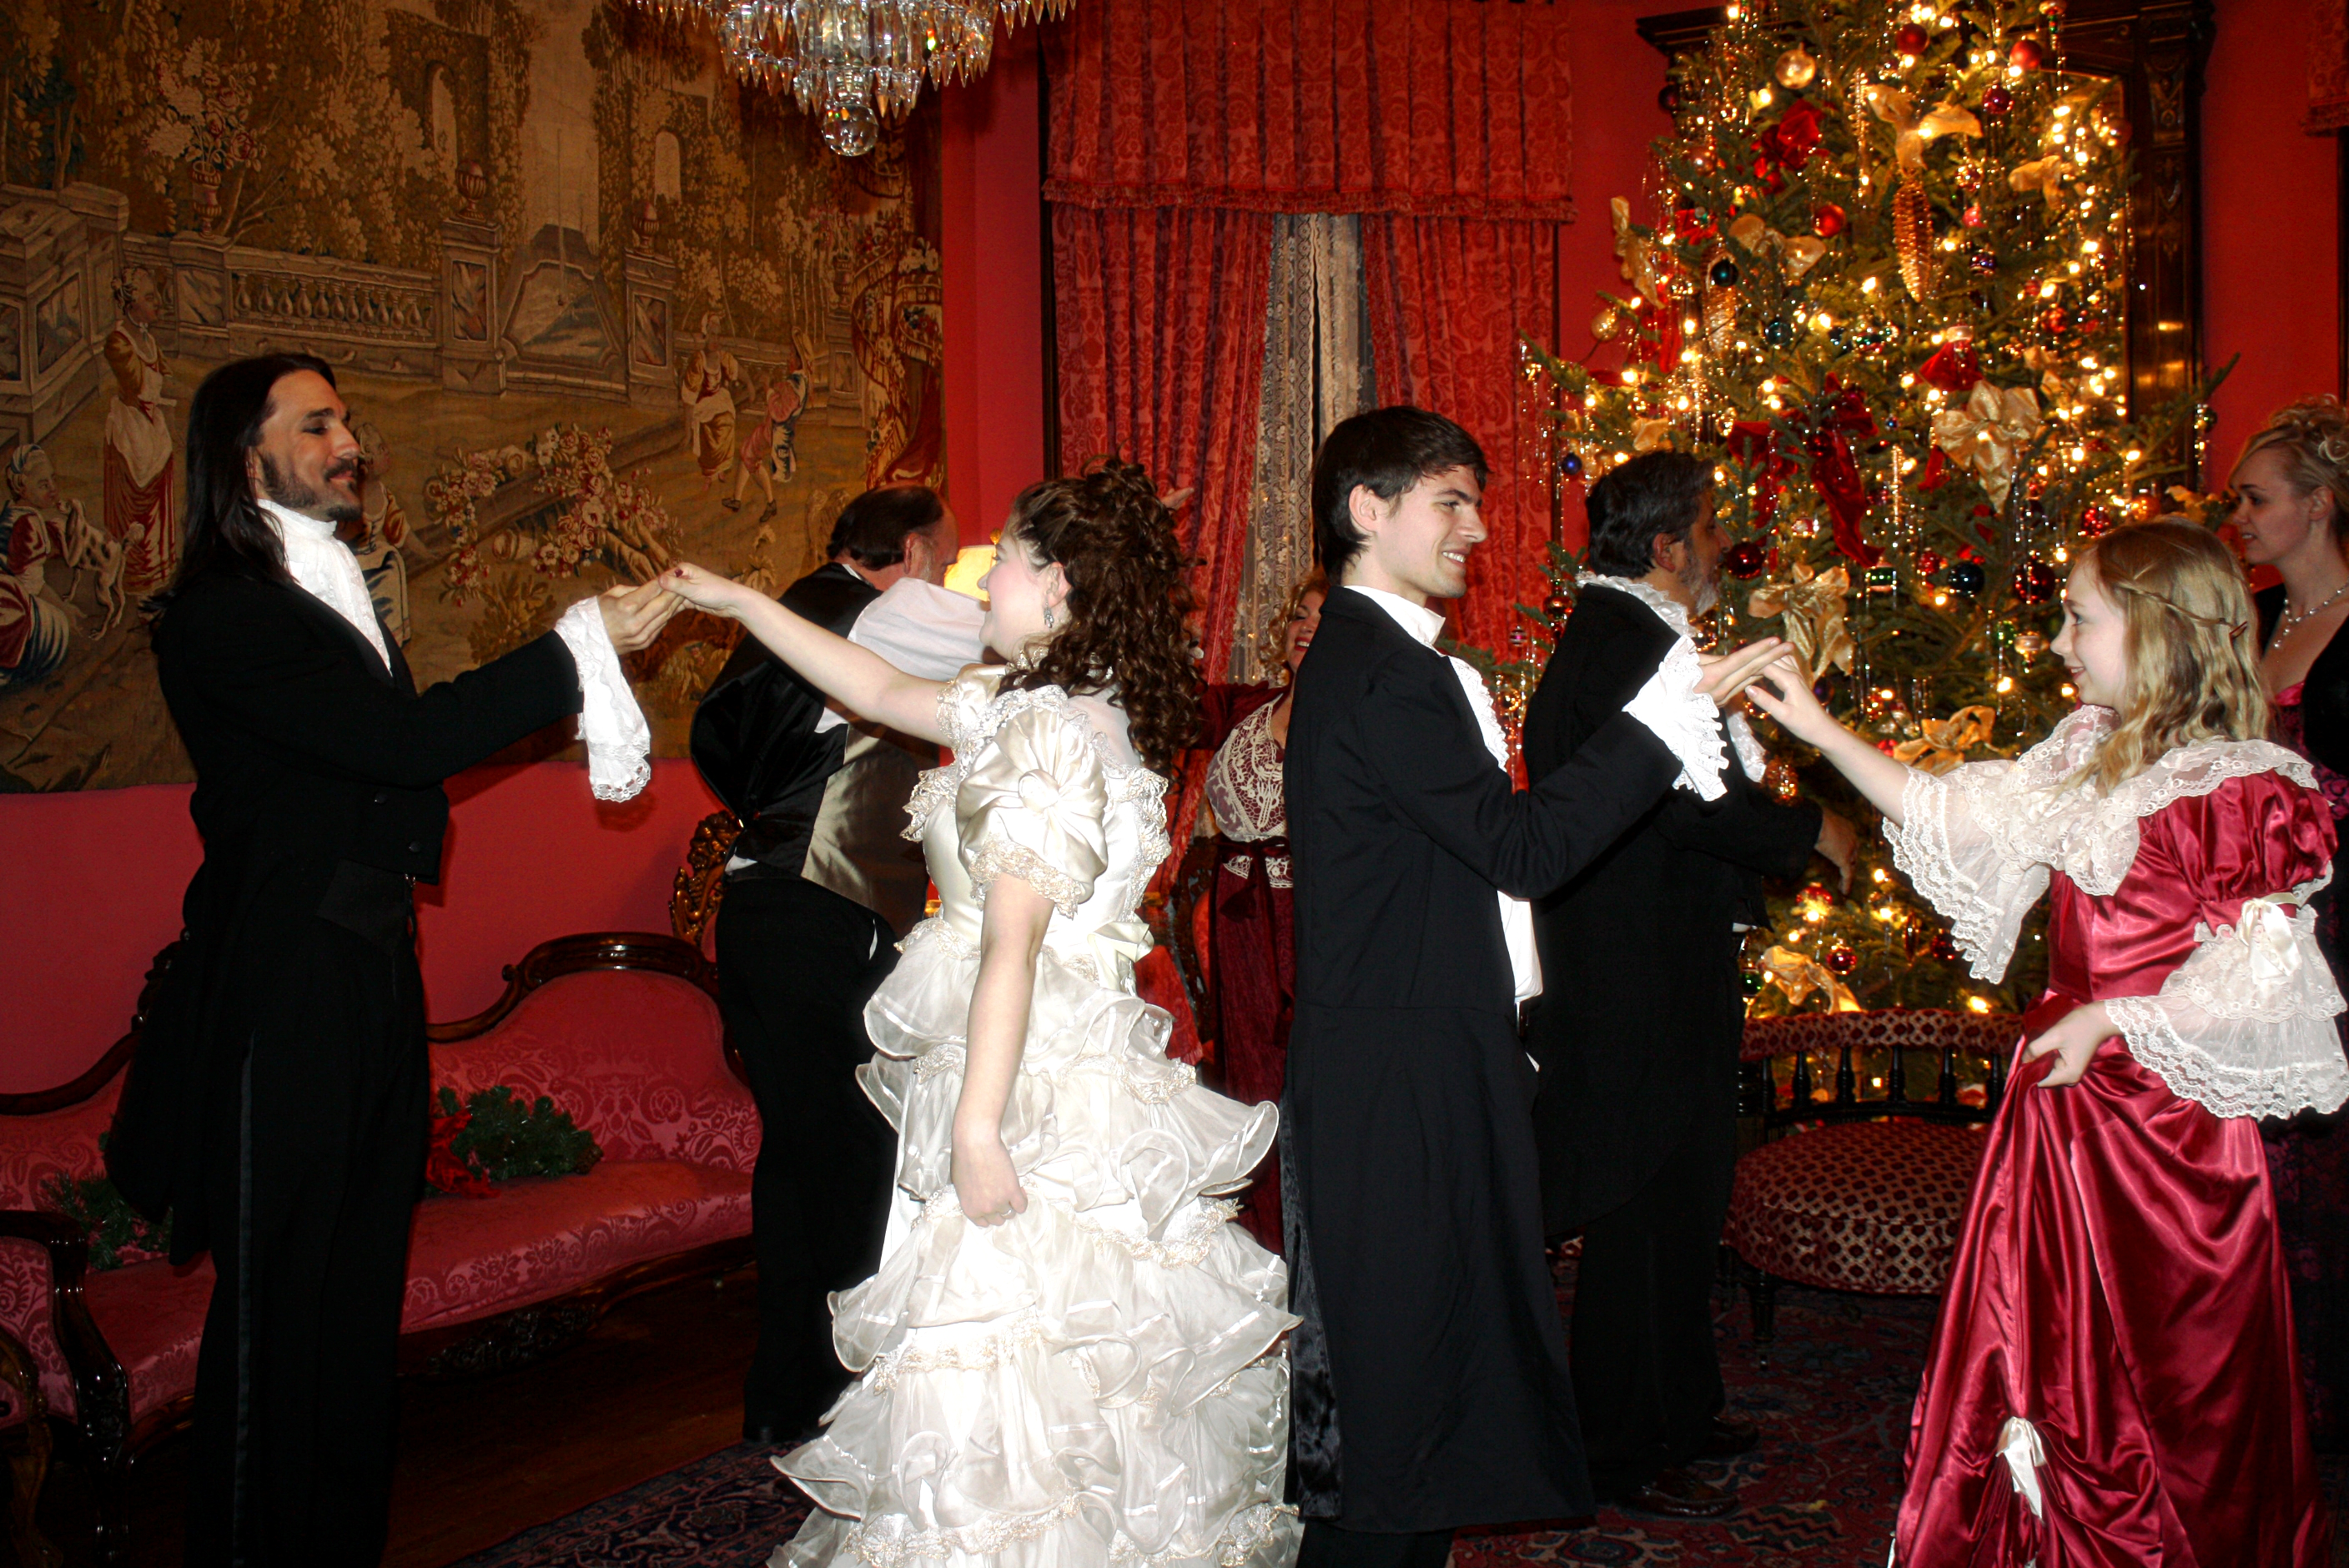 Still of Matt Wiggins as Young Scrooge with fellow cast members of the 2013 live production of Charles Dickens, A Christmas Carol at the historic Terrace Hill Mansion in Iowa.